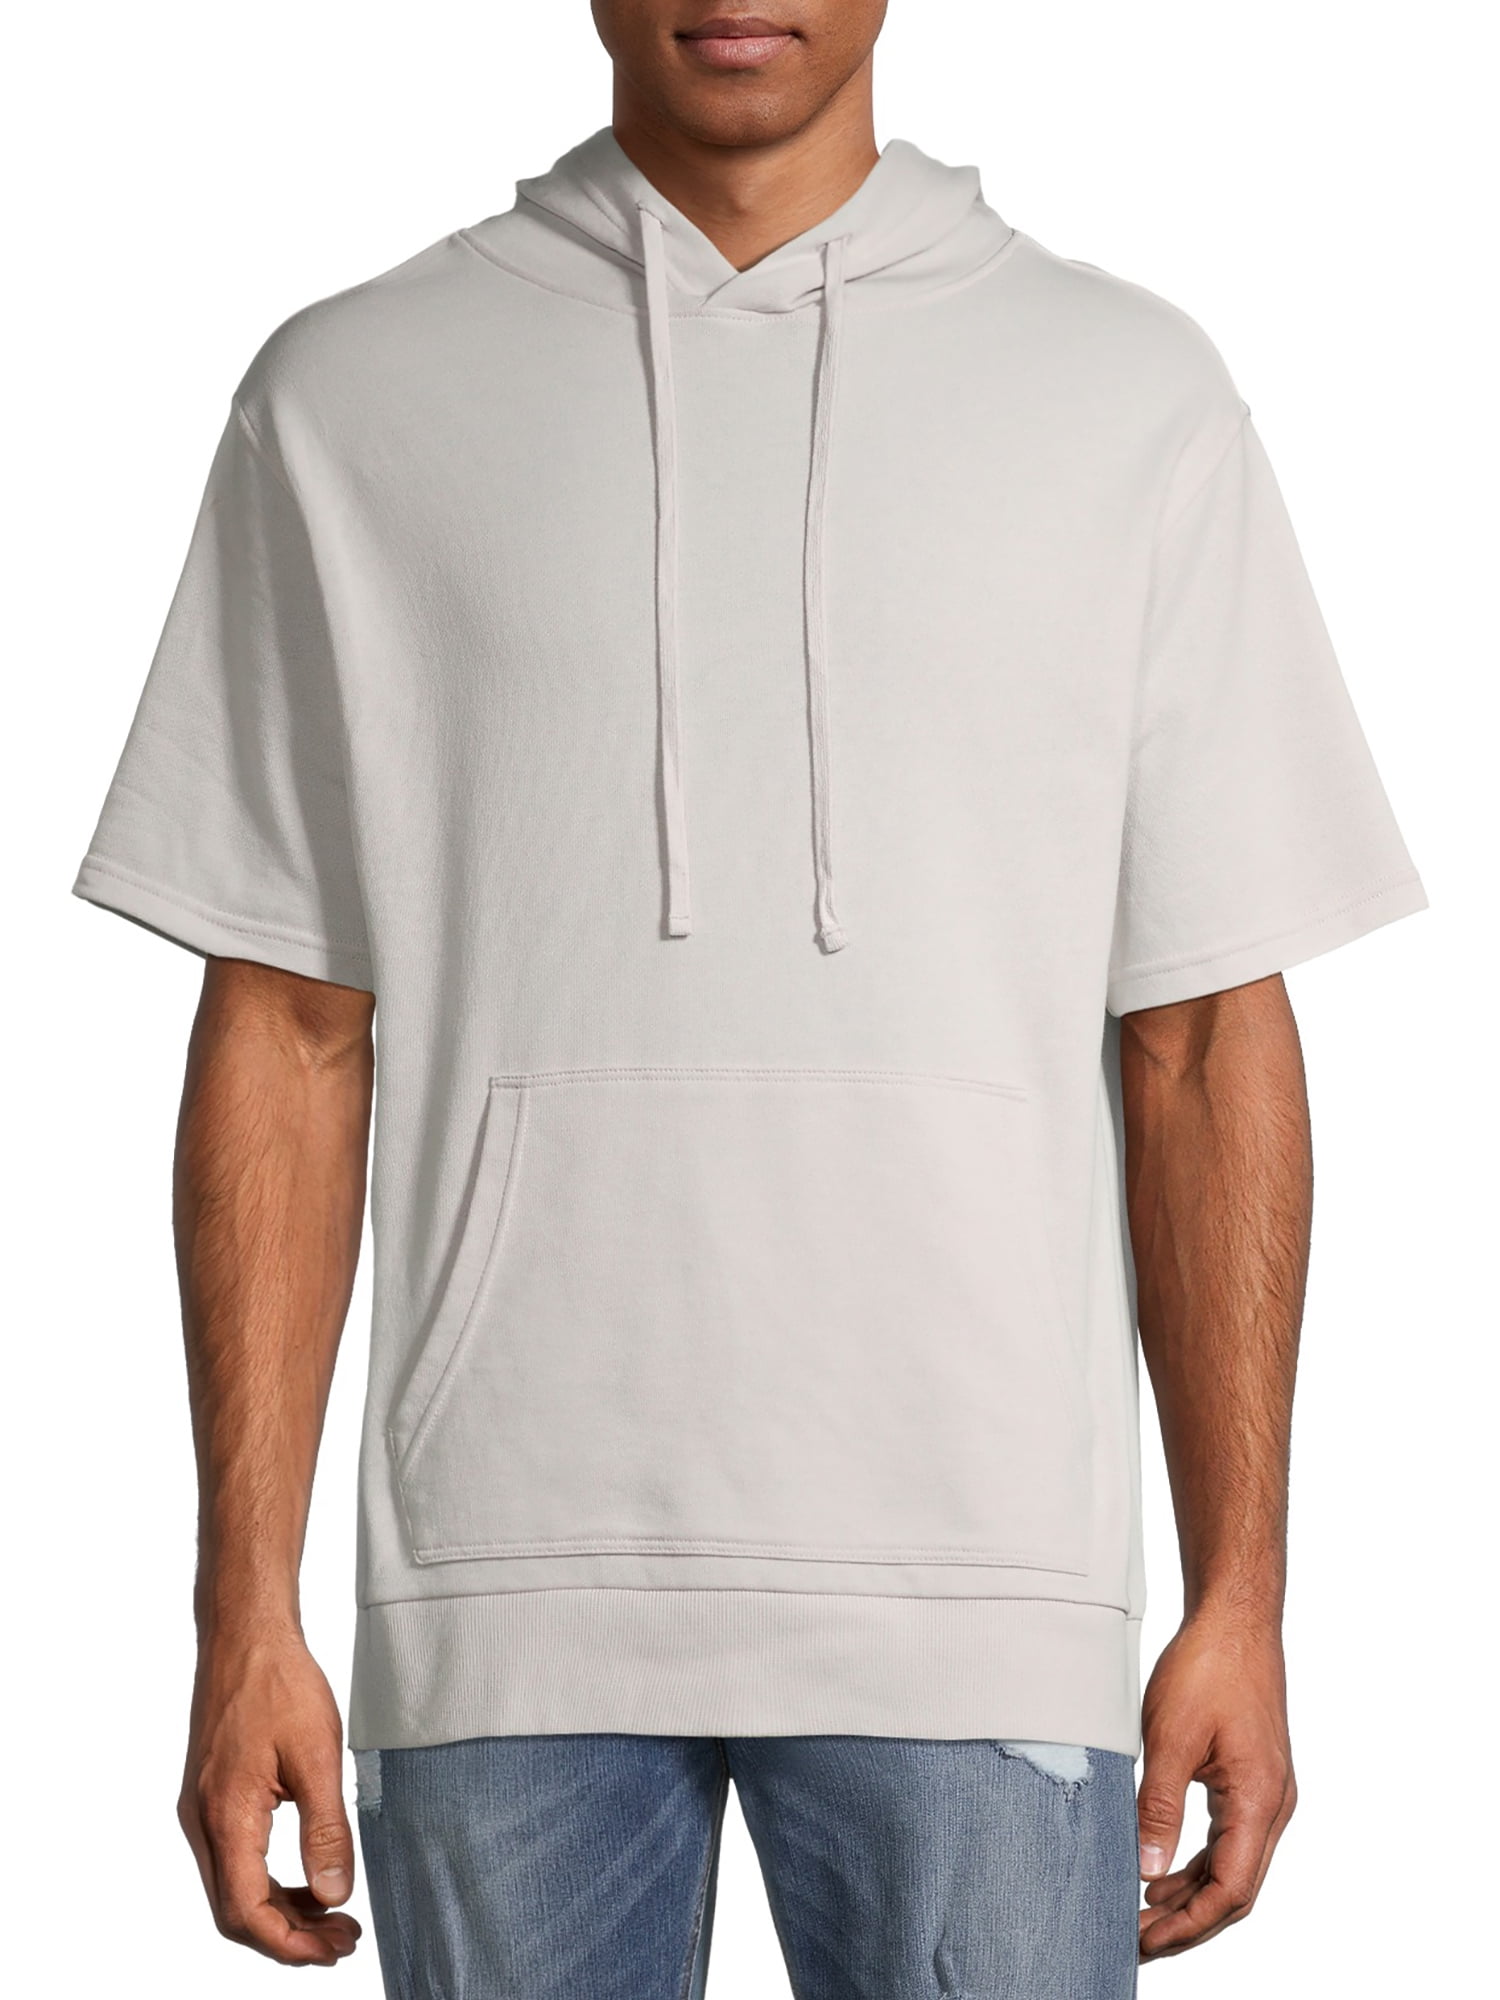 No Boundaries Men's Pullover Hoodie with Short Sleeves, Sizes XS